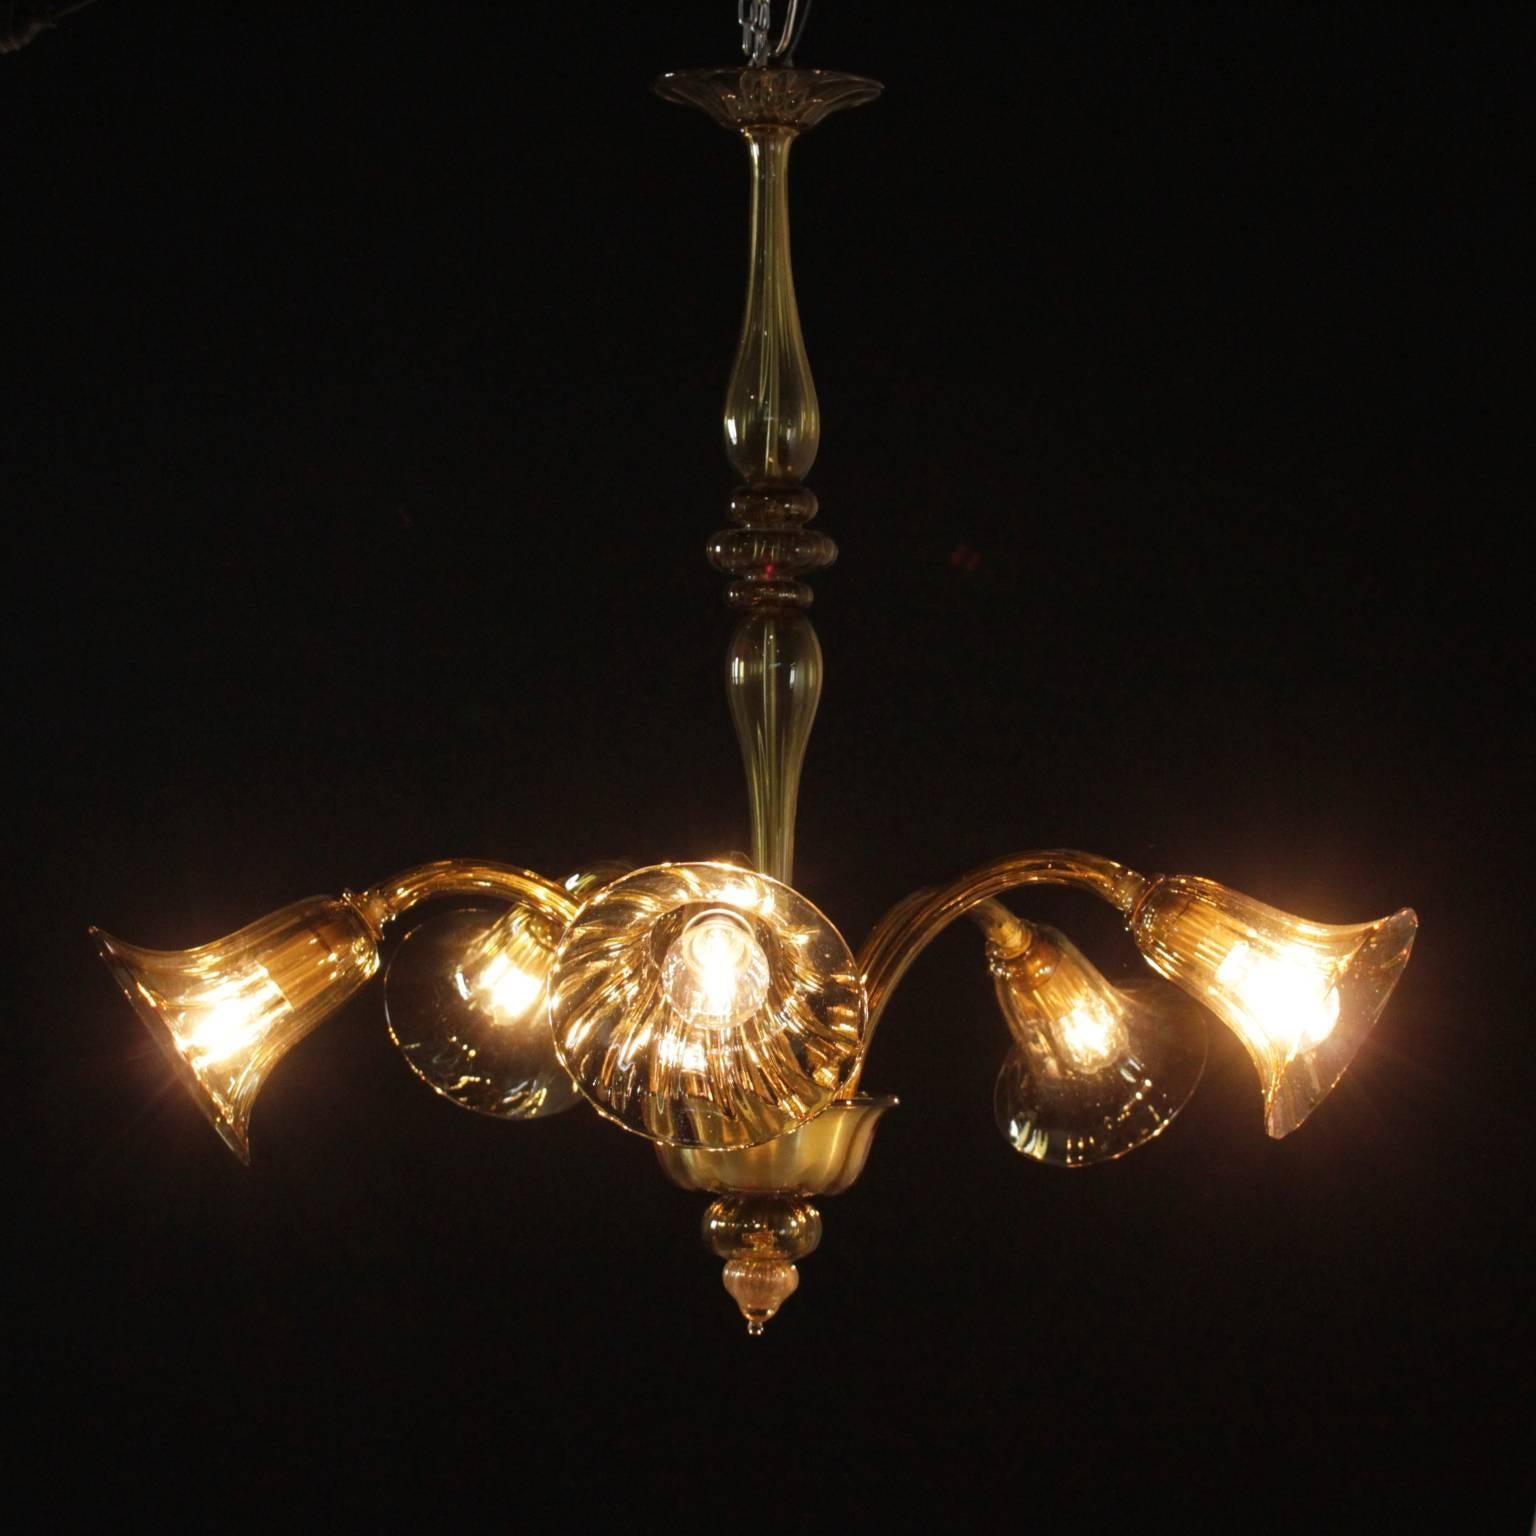 A blown glass hanging lamp, manufactured in Italy, 1940s-1950s.